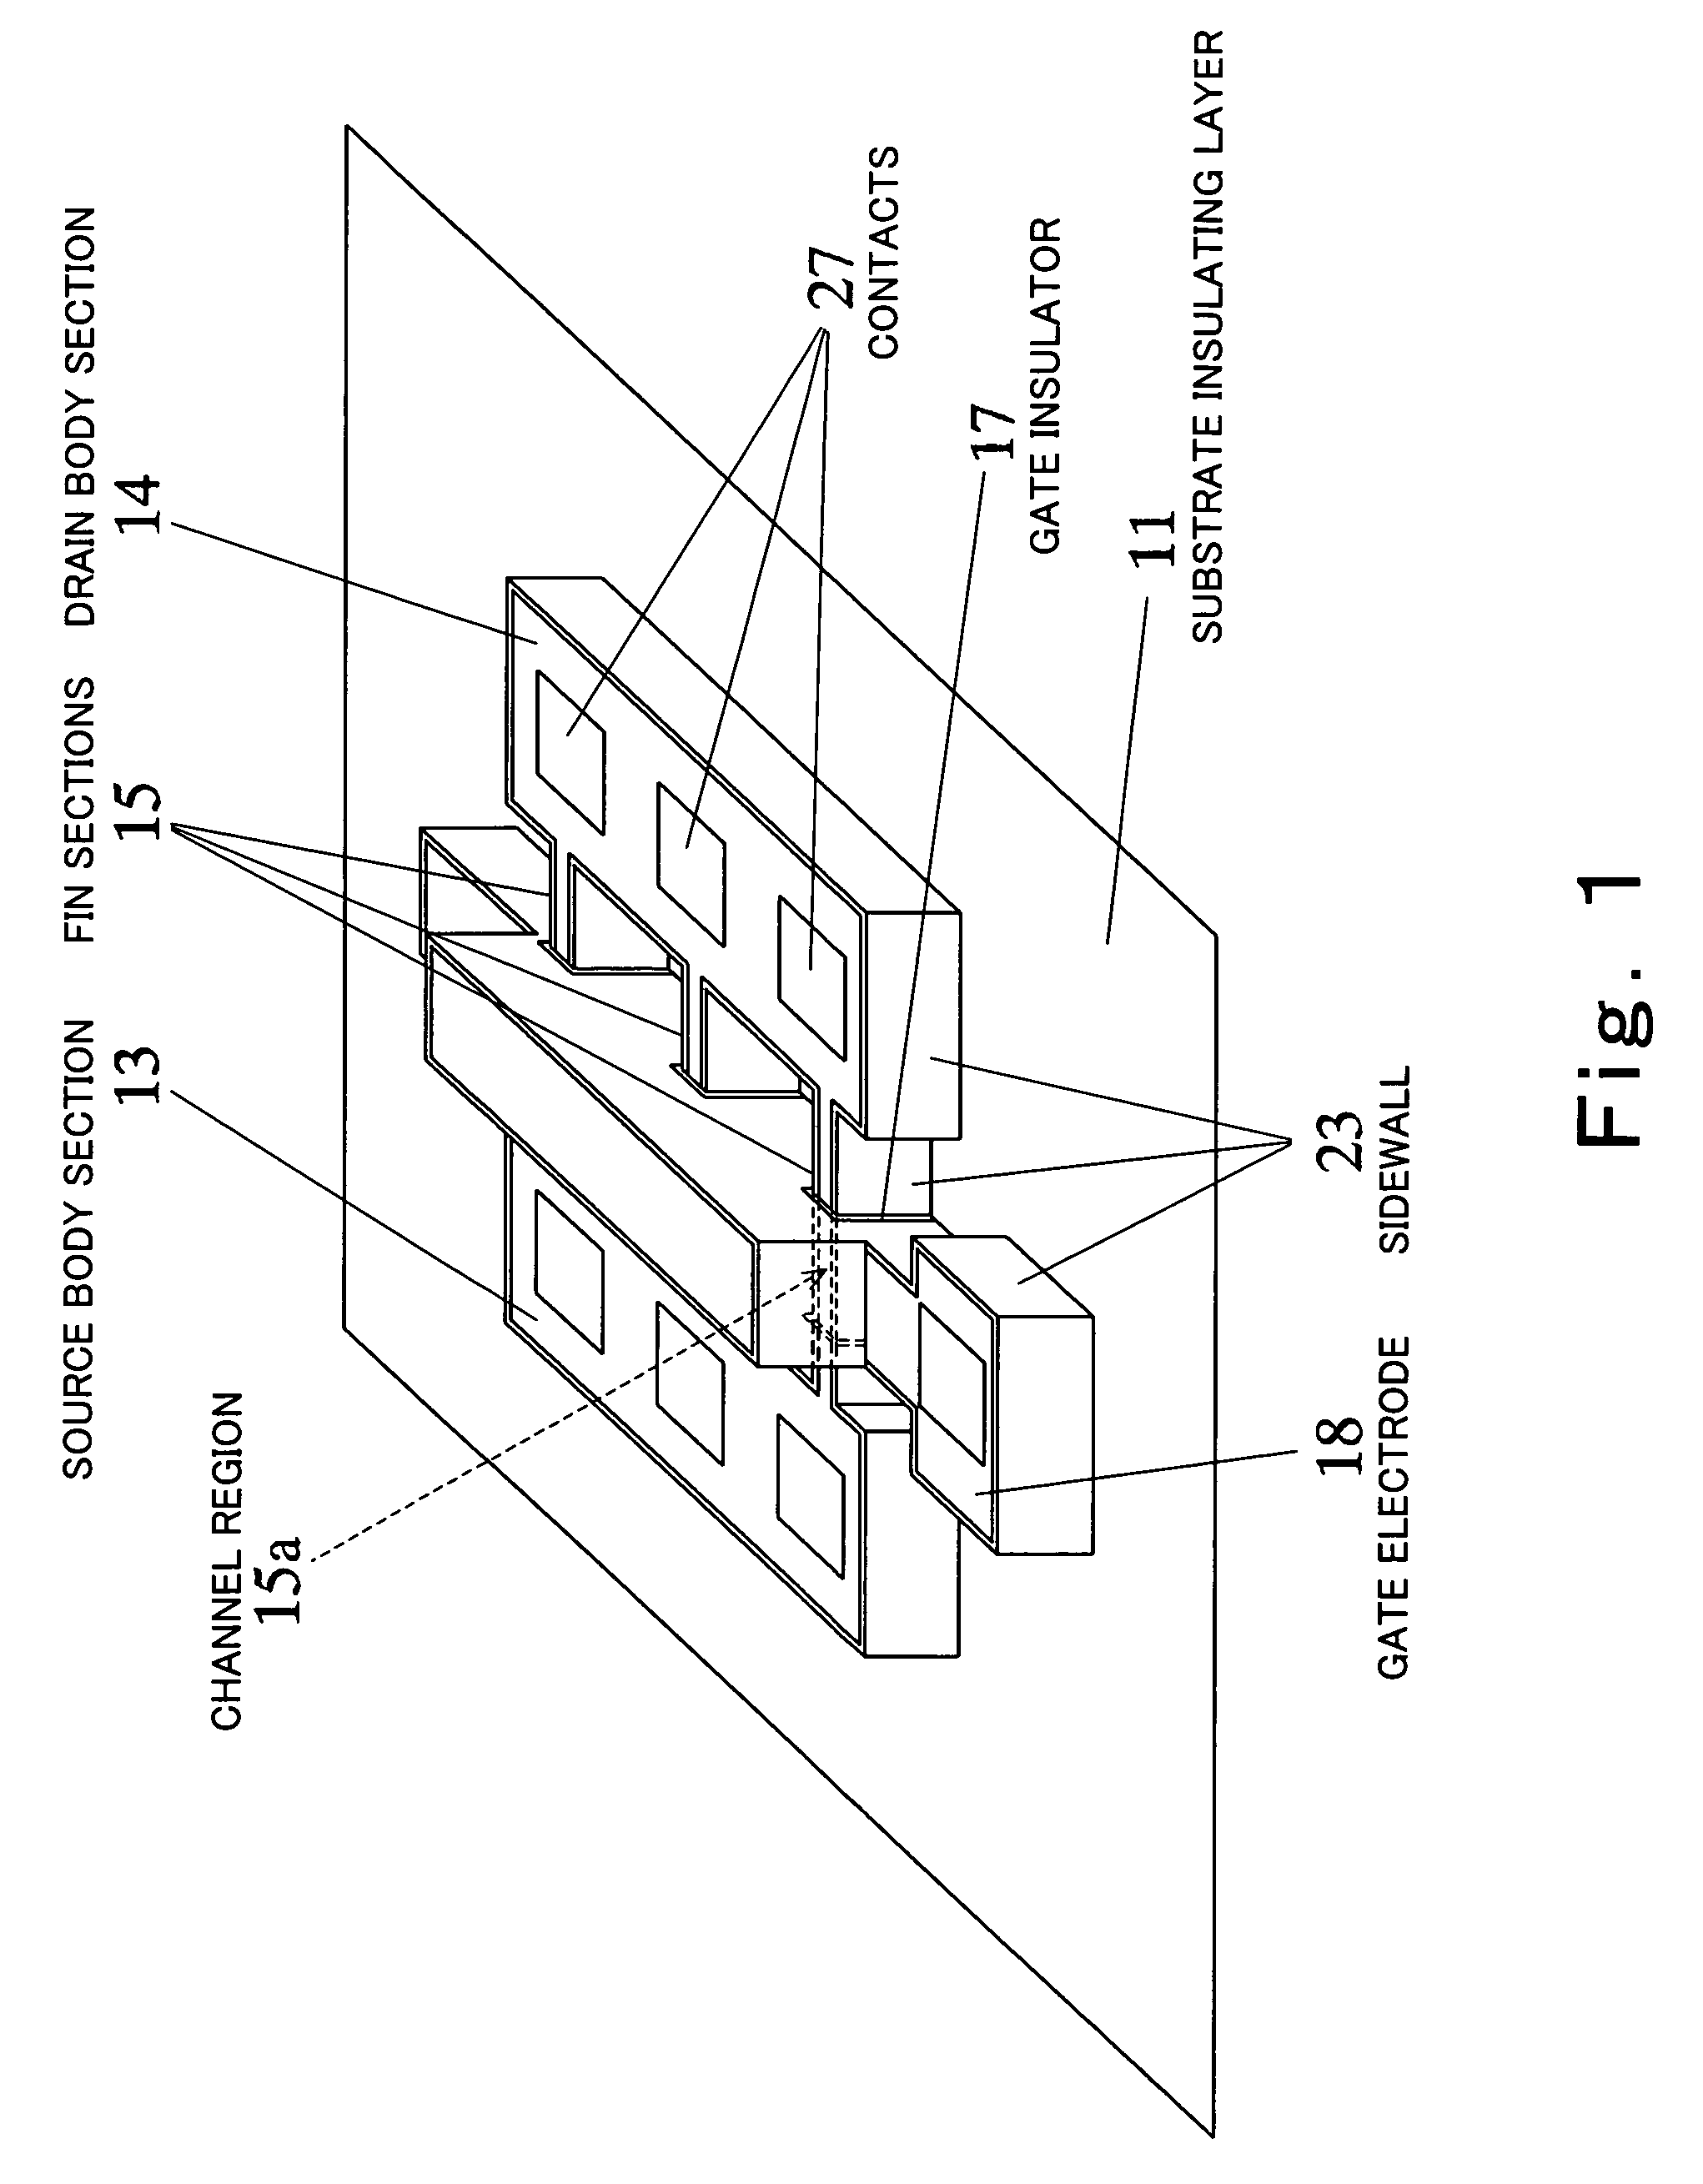 Strained channel finFET device